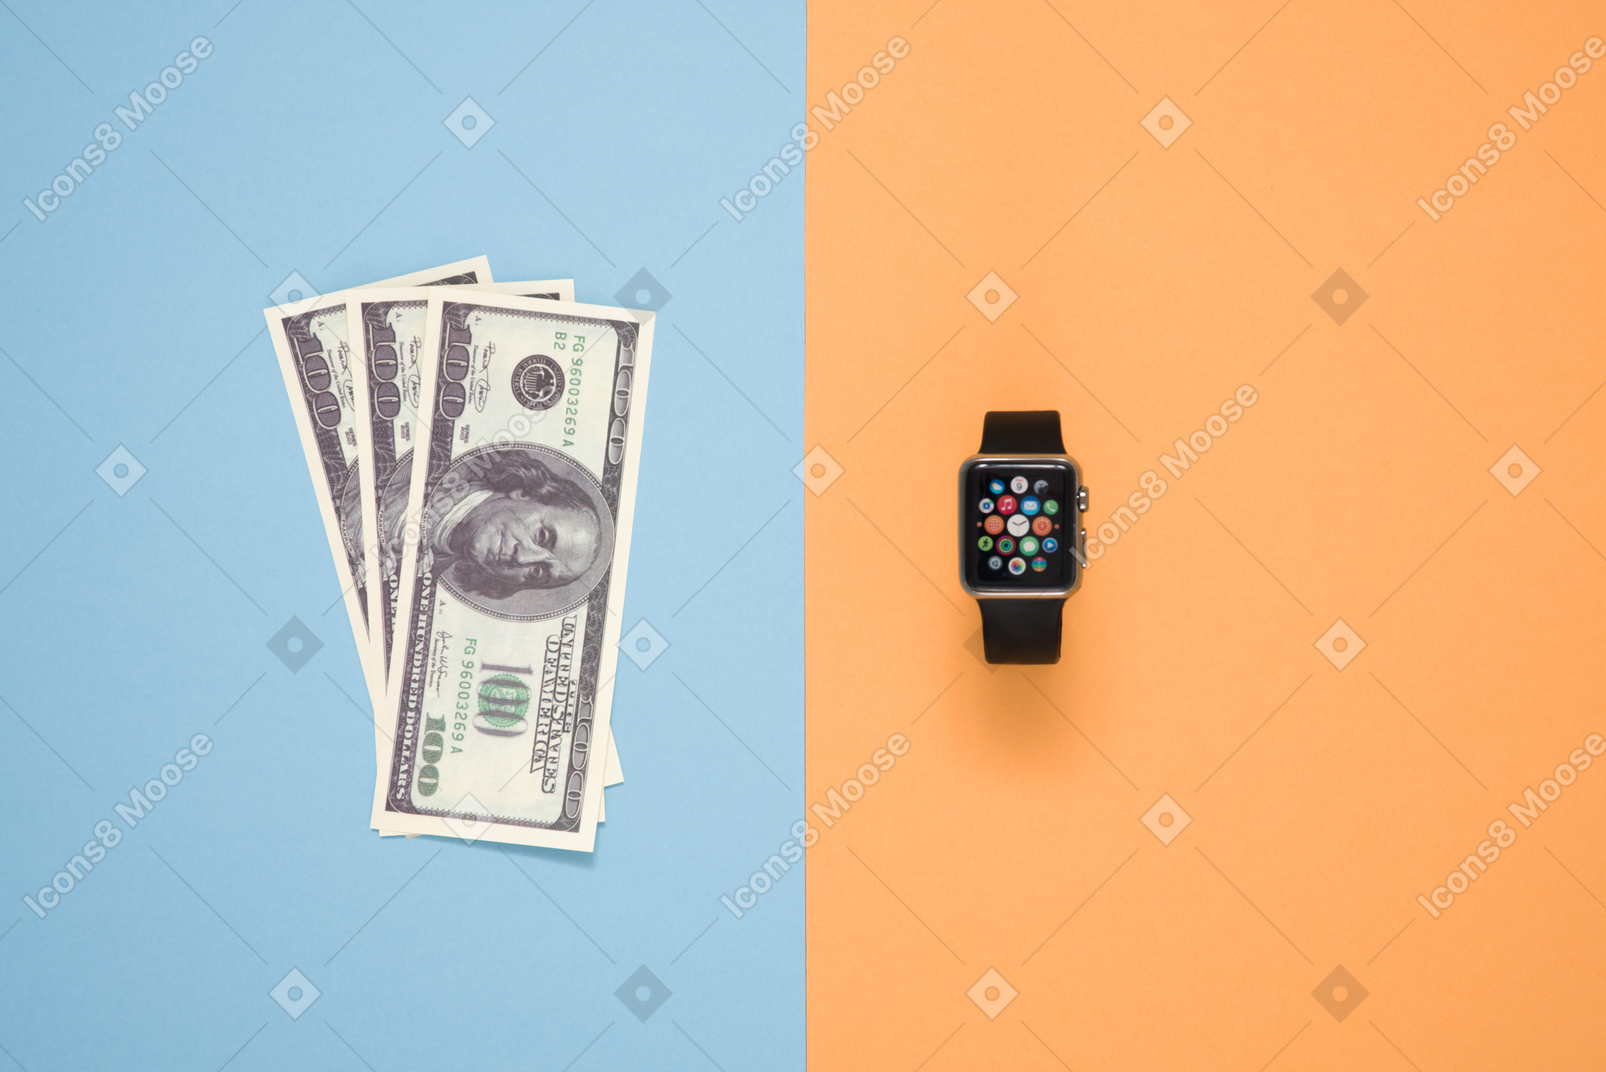 Are smartwatches worth buying